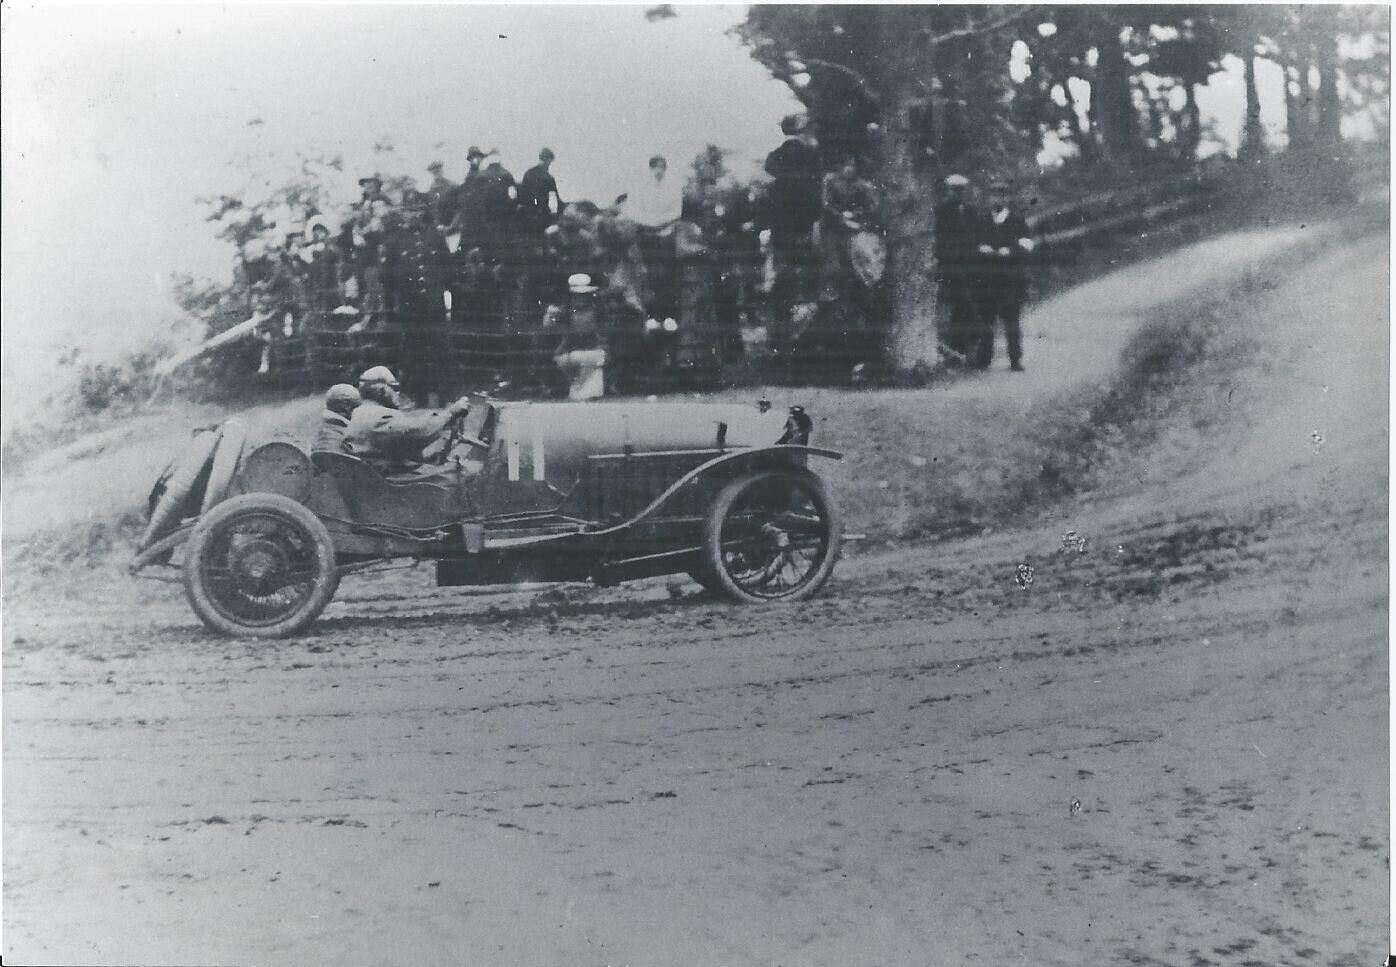 BIANCHI AND CROSSLEY DURING 1914 TOURIST TROPHY RACE B/W PHOTOGRAPH